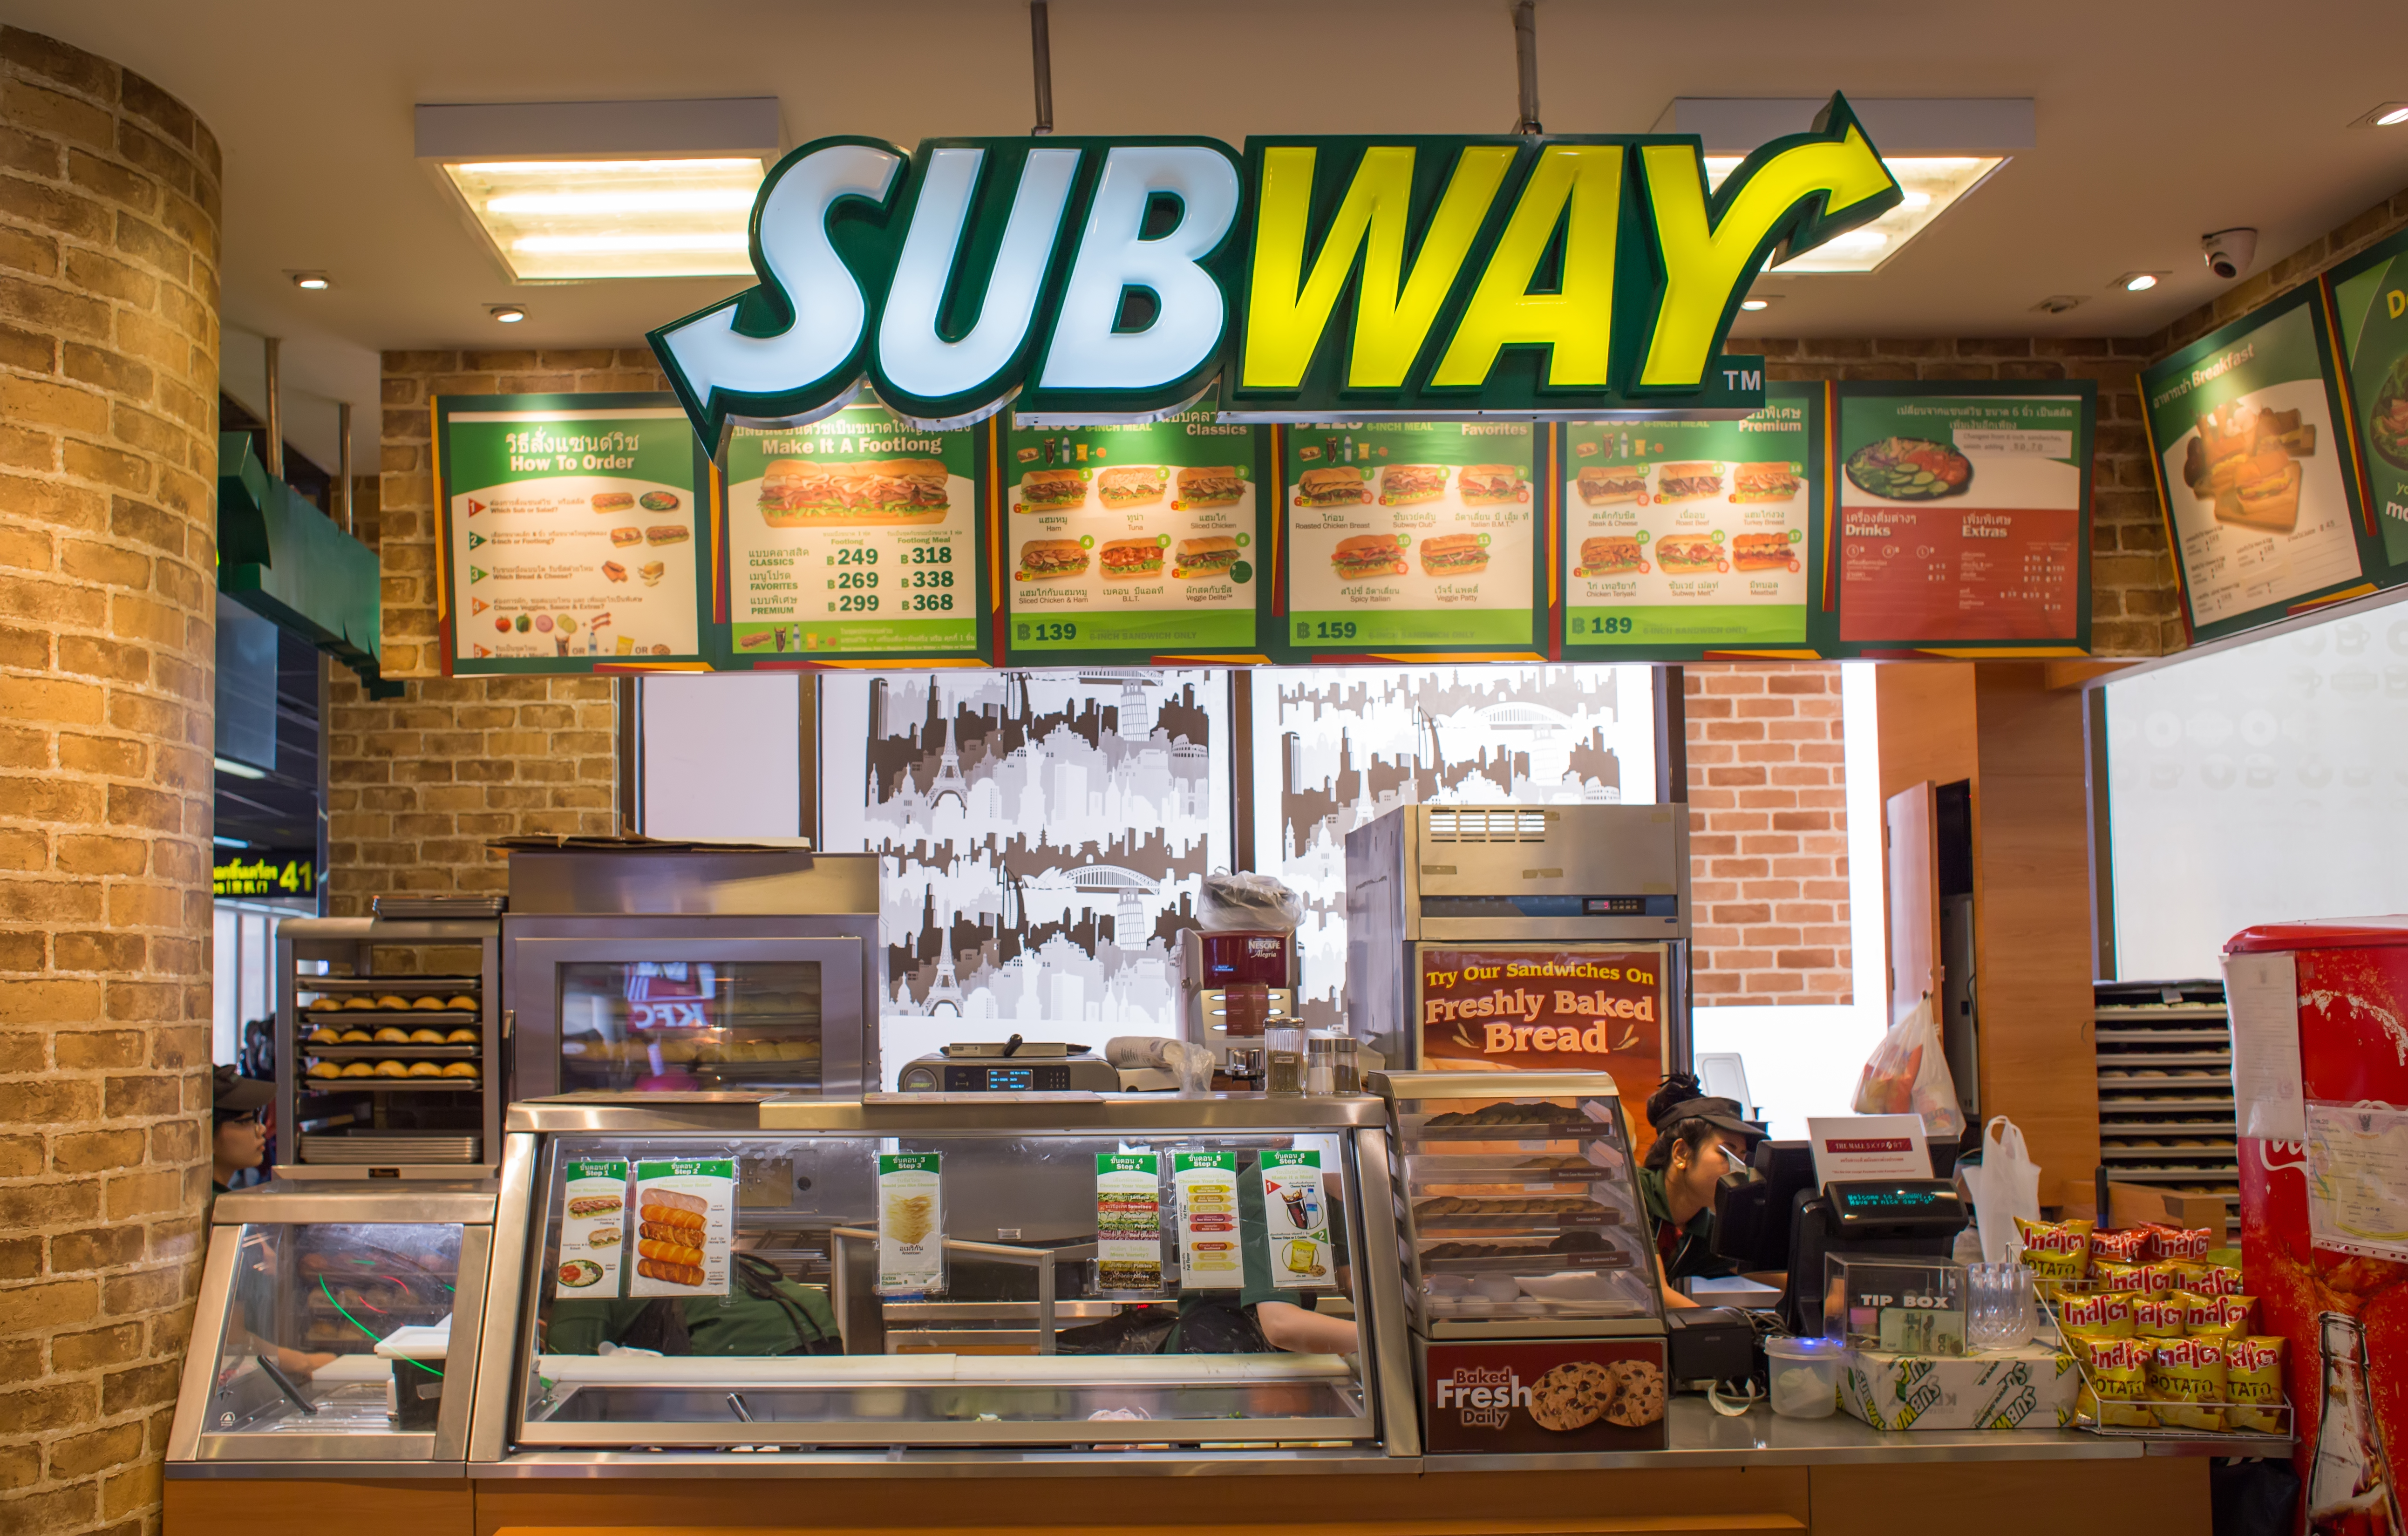 Subway Is Giving Away Free Subs in Honor of National Sandwich Day